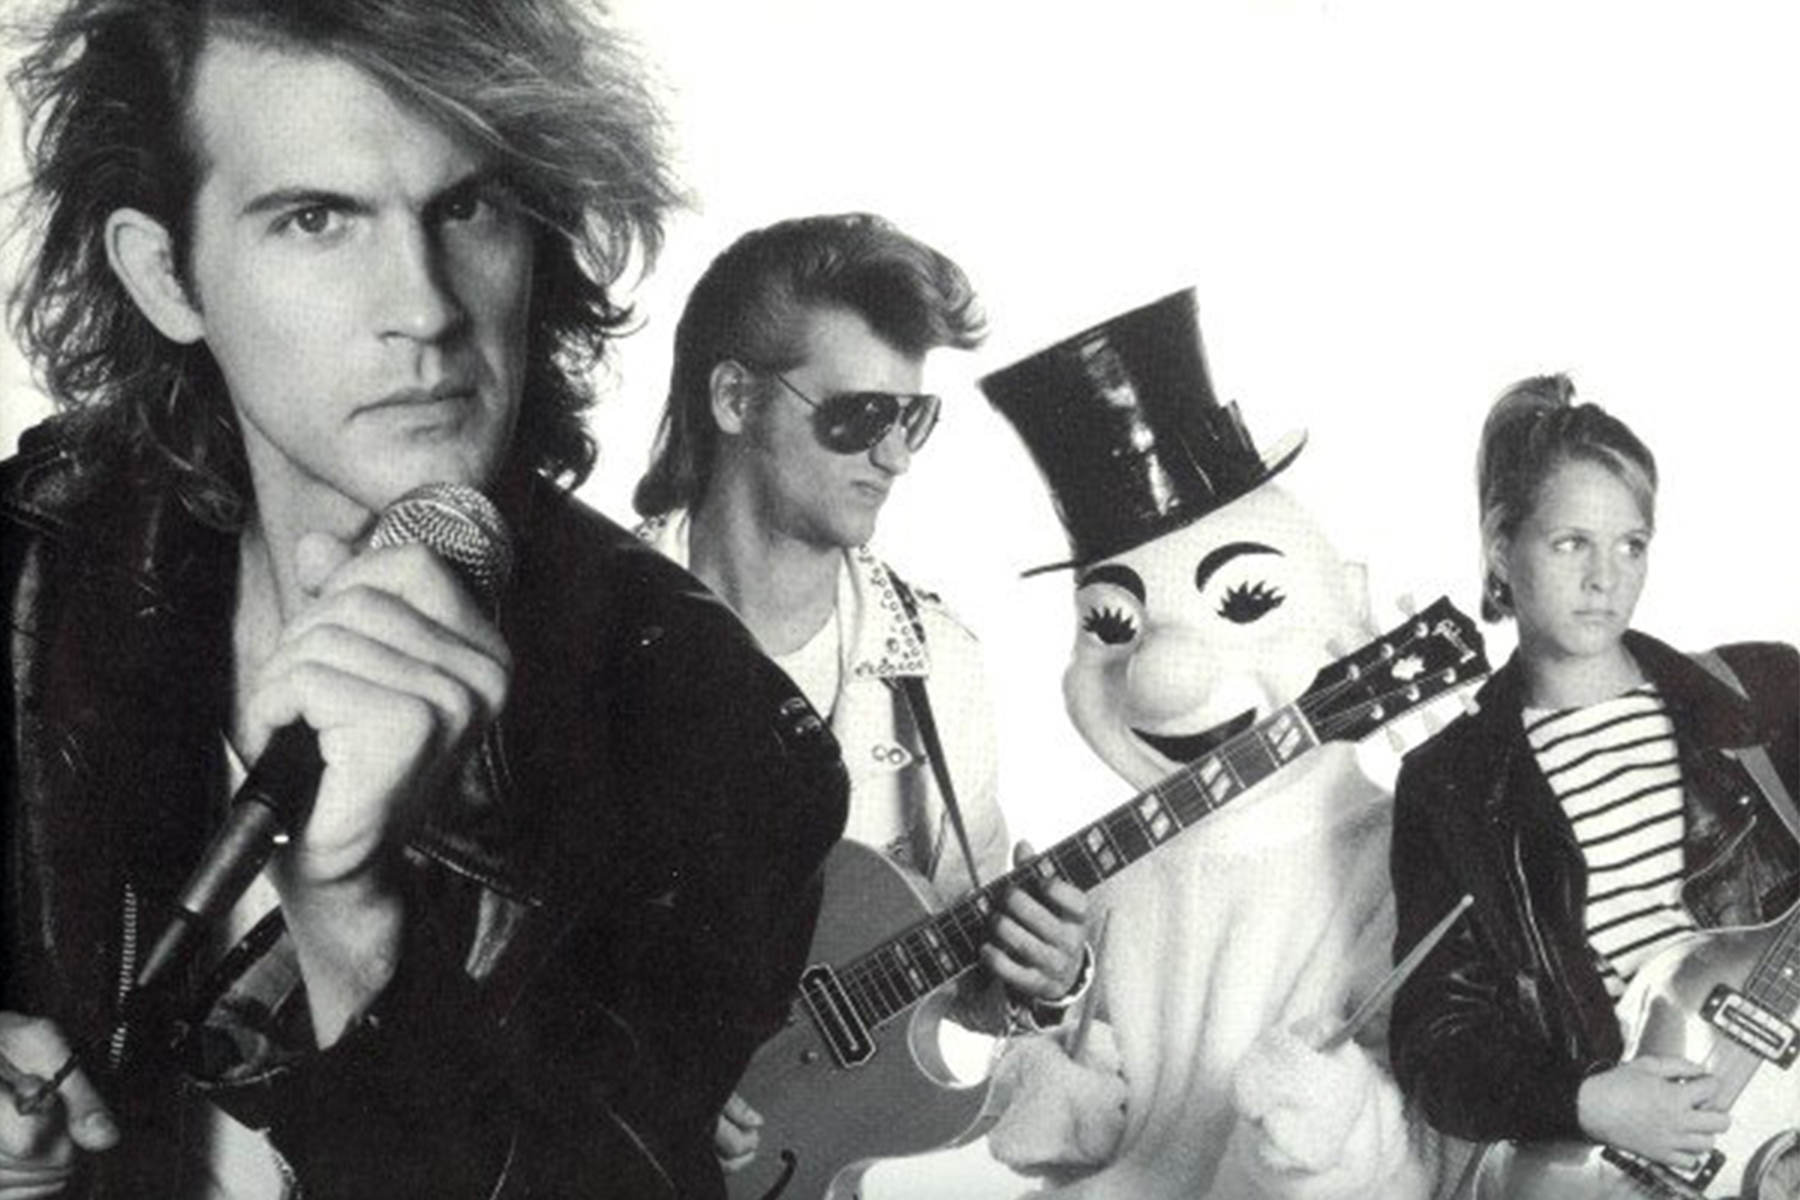 Without Hats — Jay Siegan